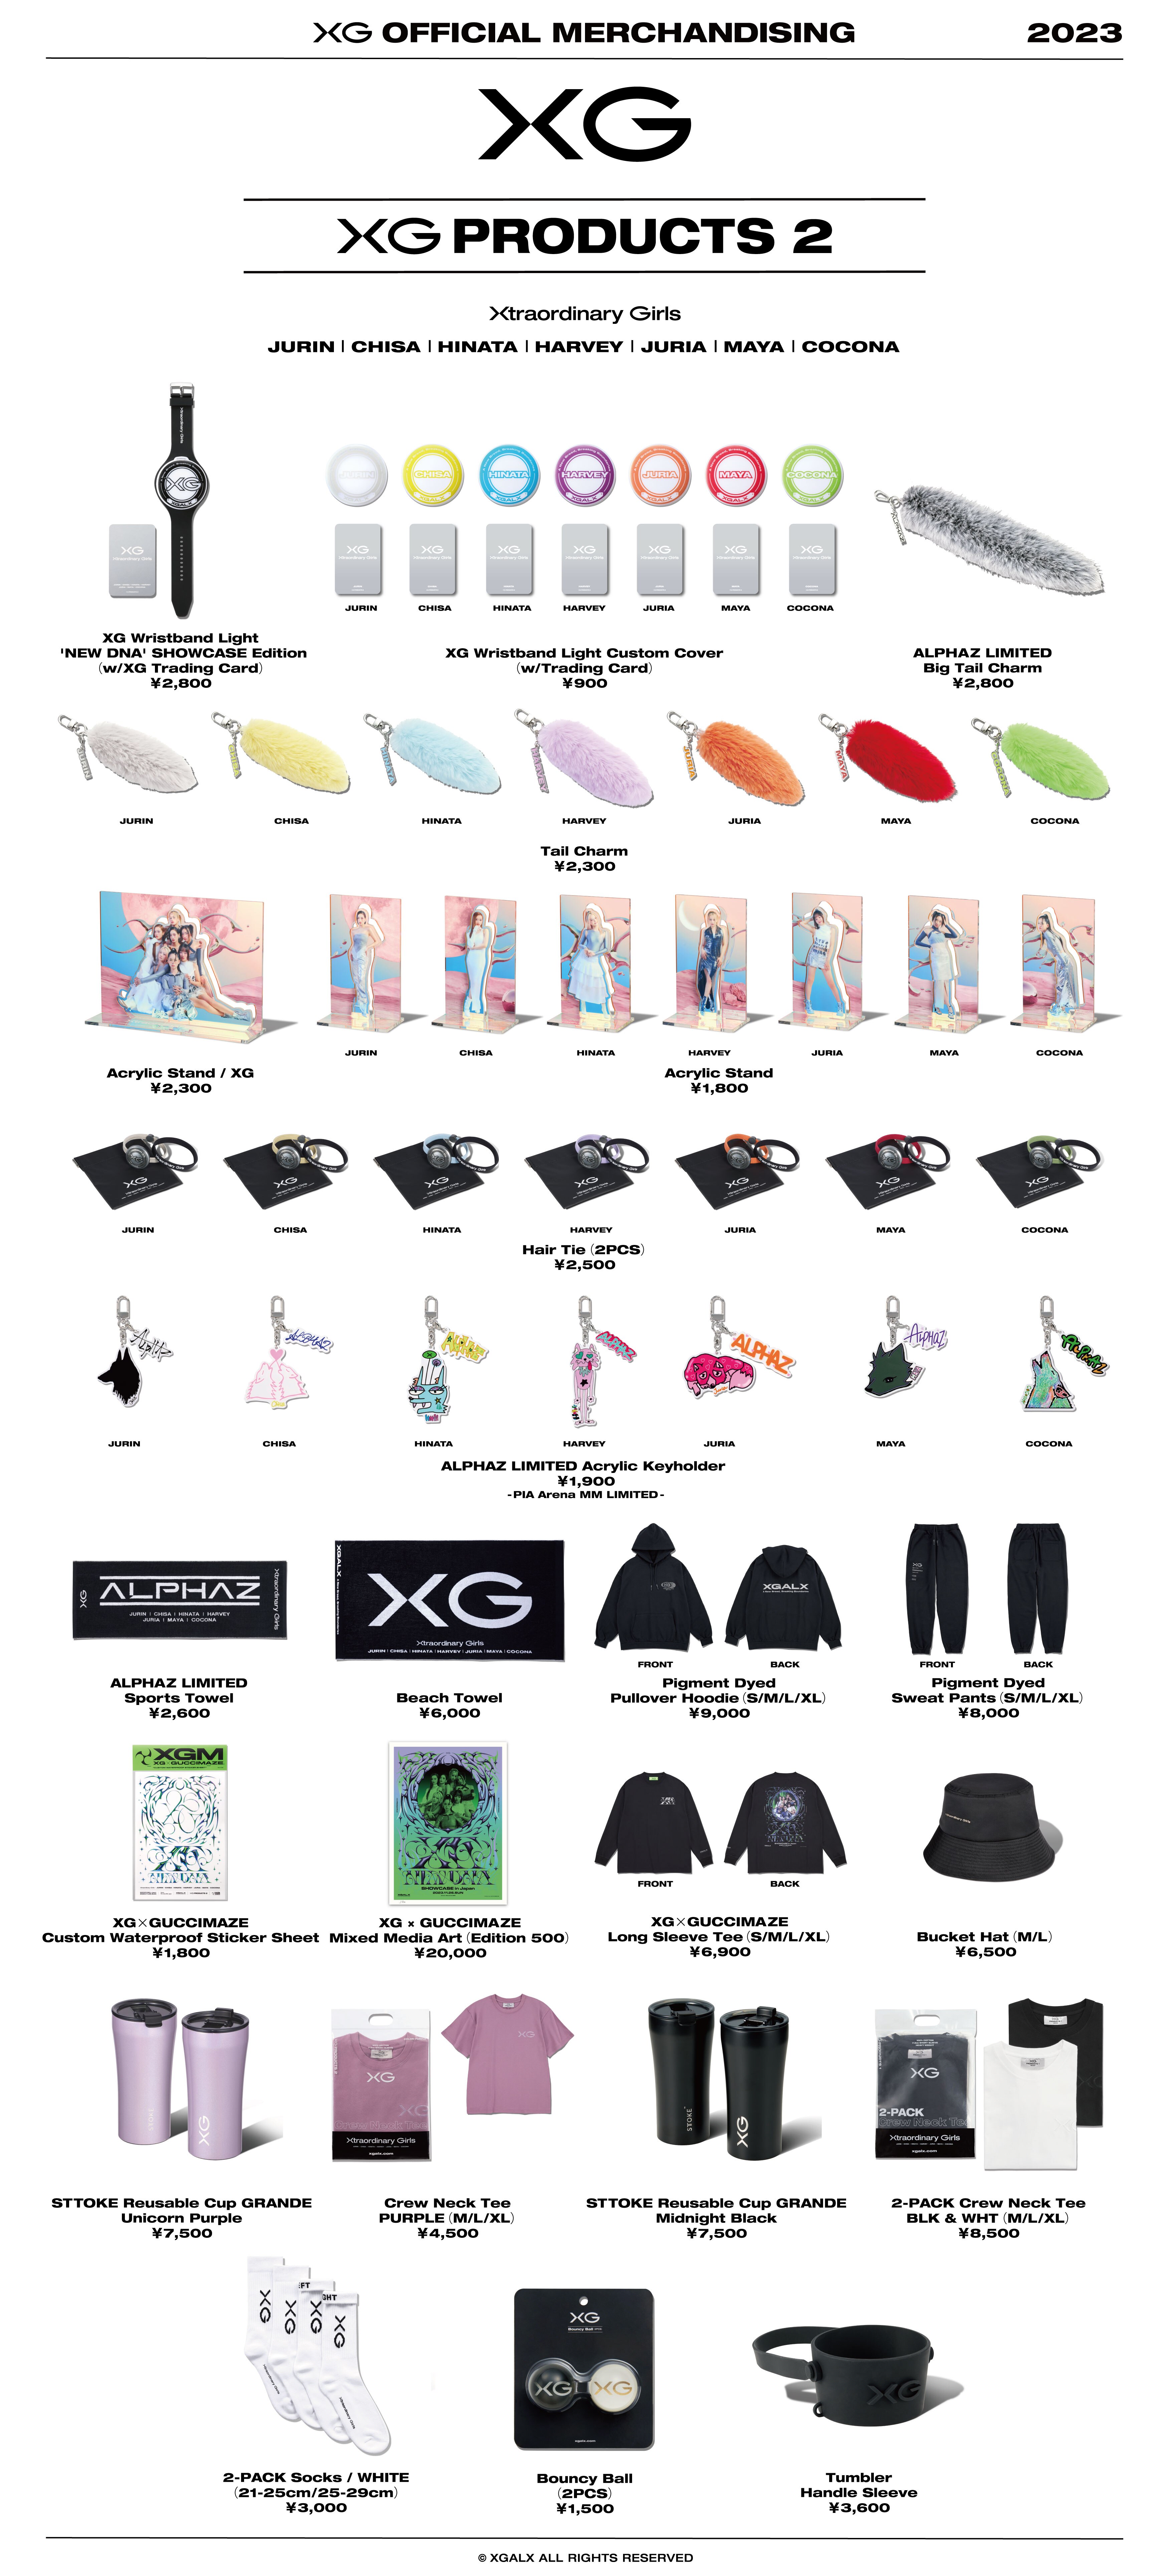 XG OFFICIAL MERCHANDISE “XG PRODUCTS 2” Launch Details! - NEWS